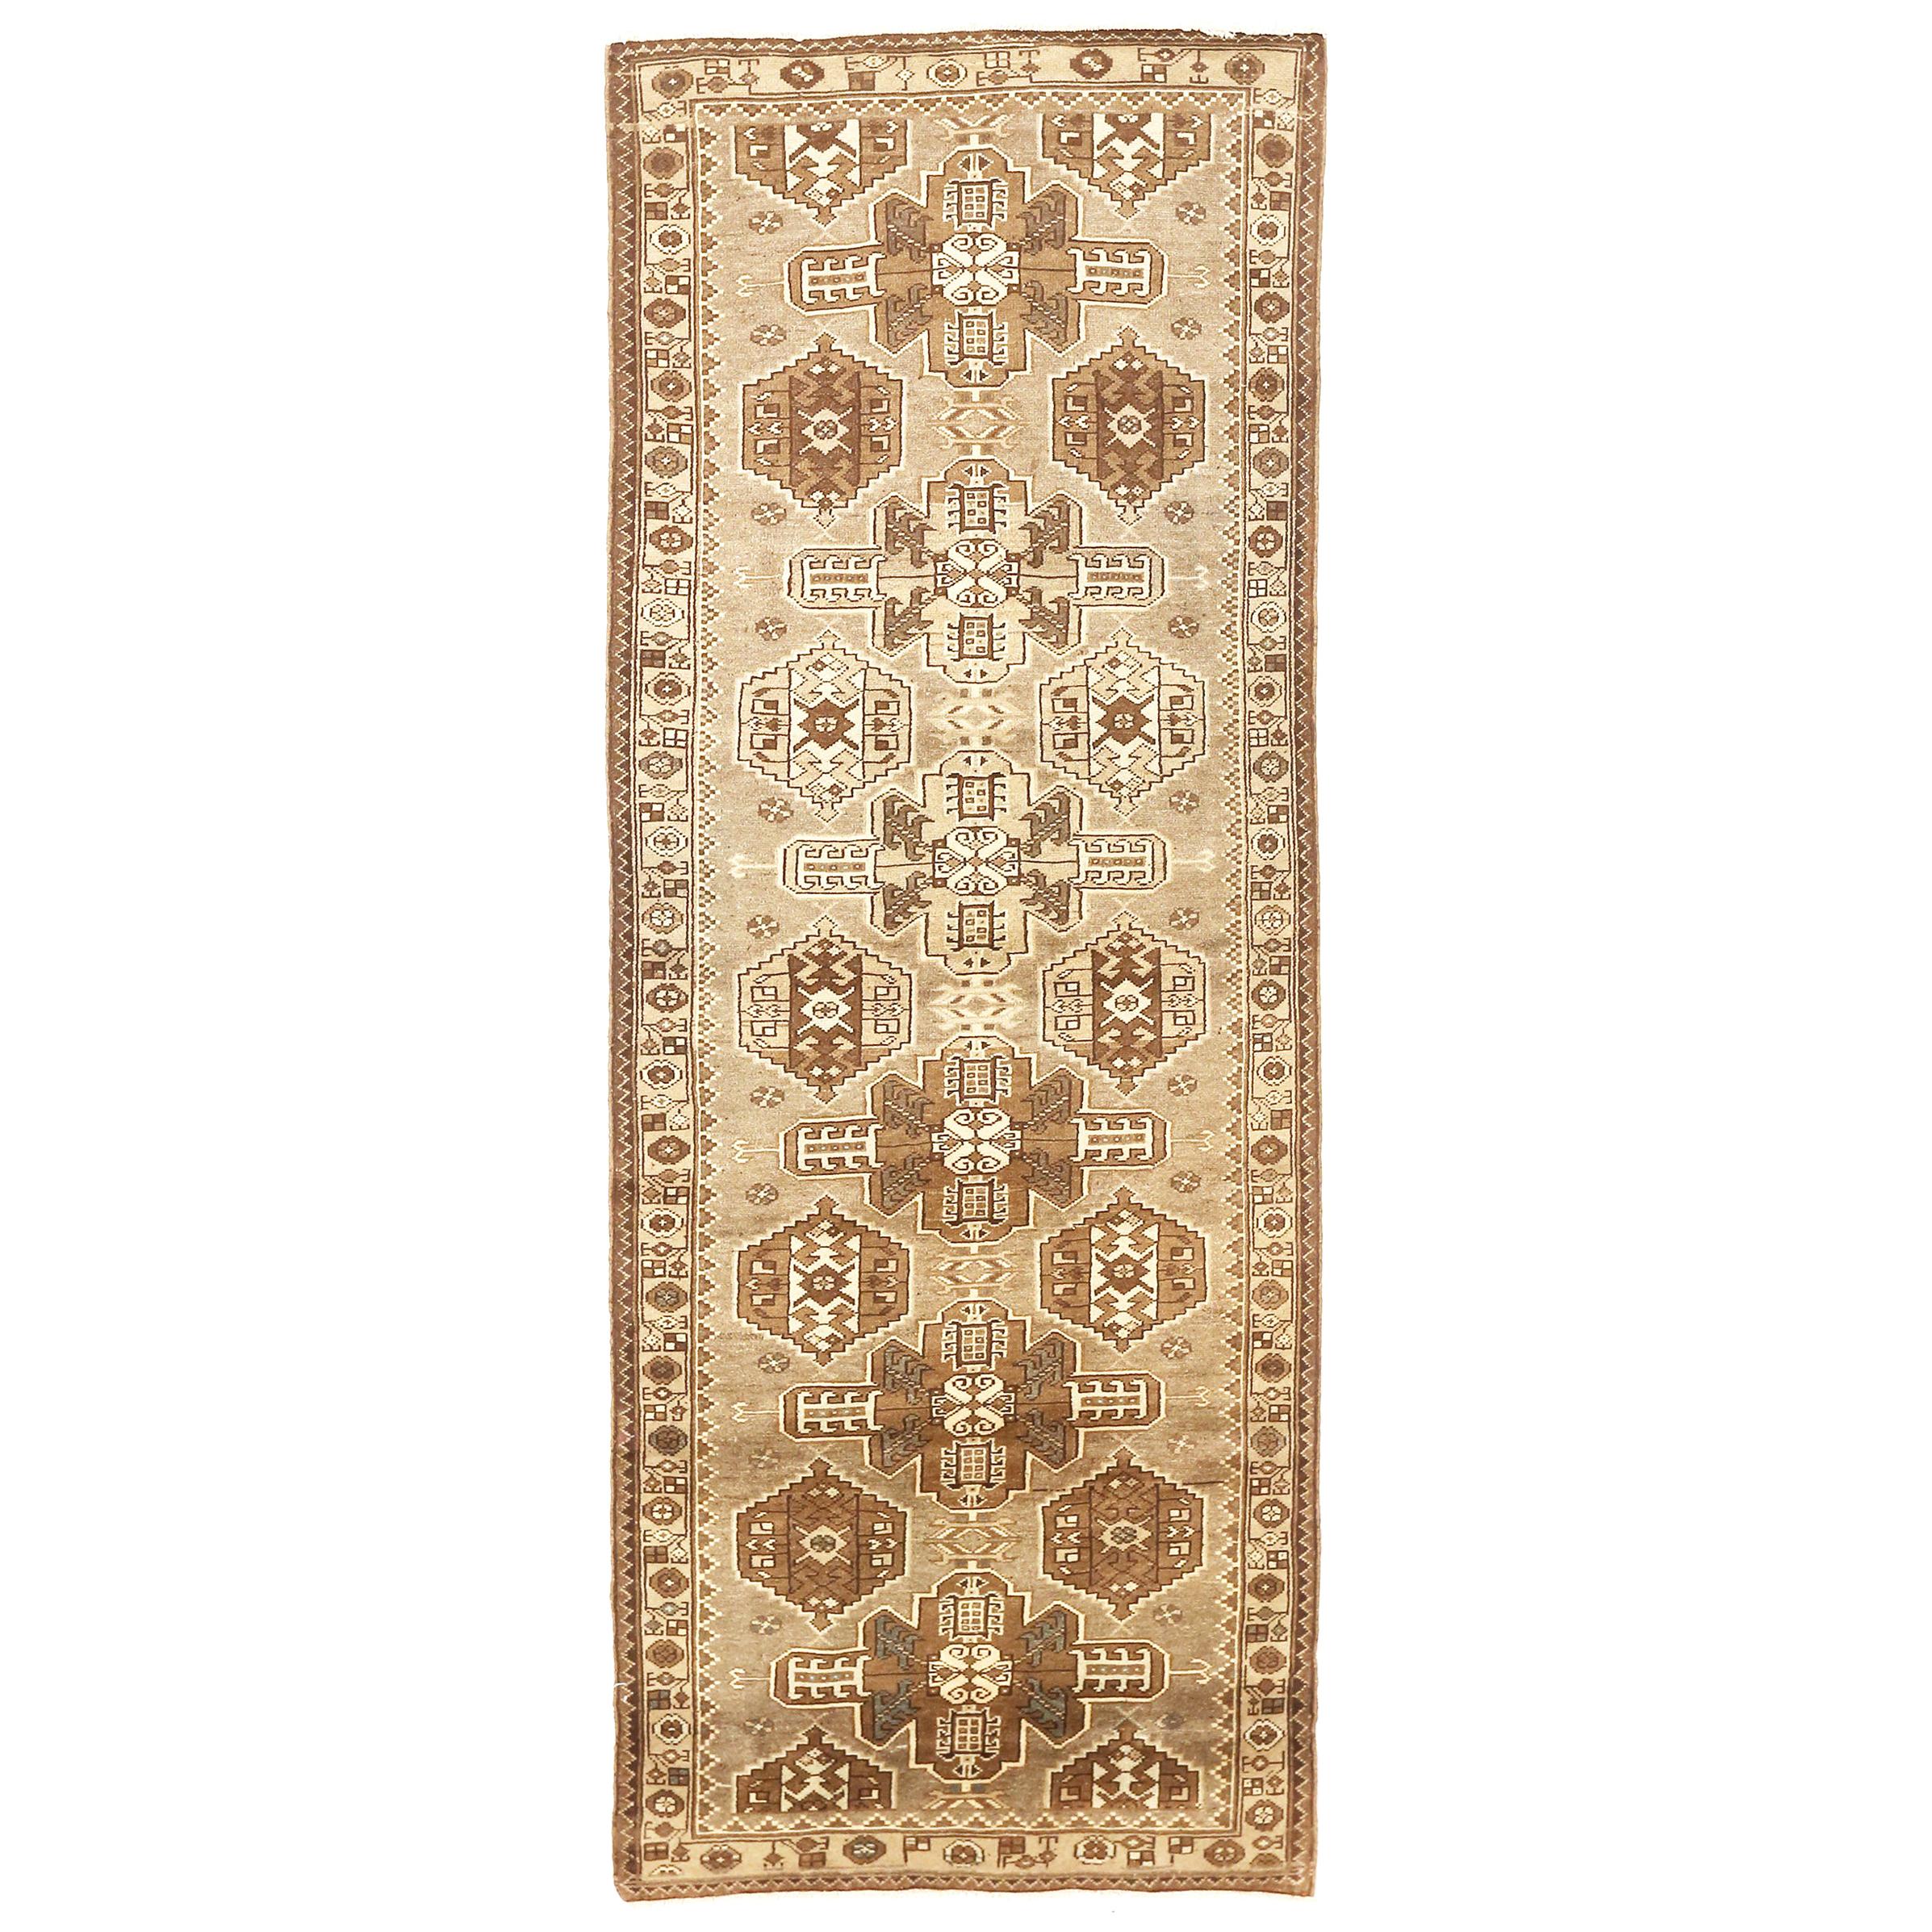 Antique Persian Malayer Runner Rug with Ivory and Brown Tribal Details